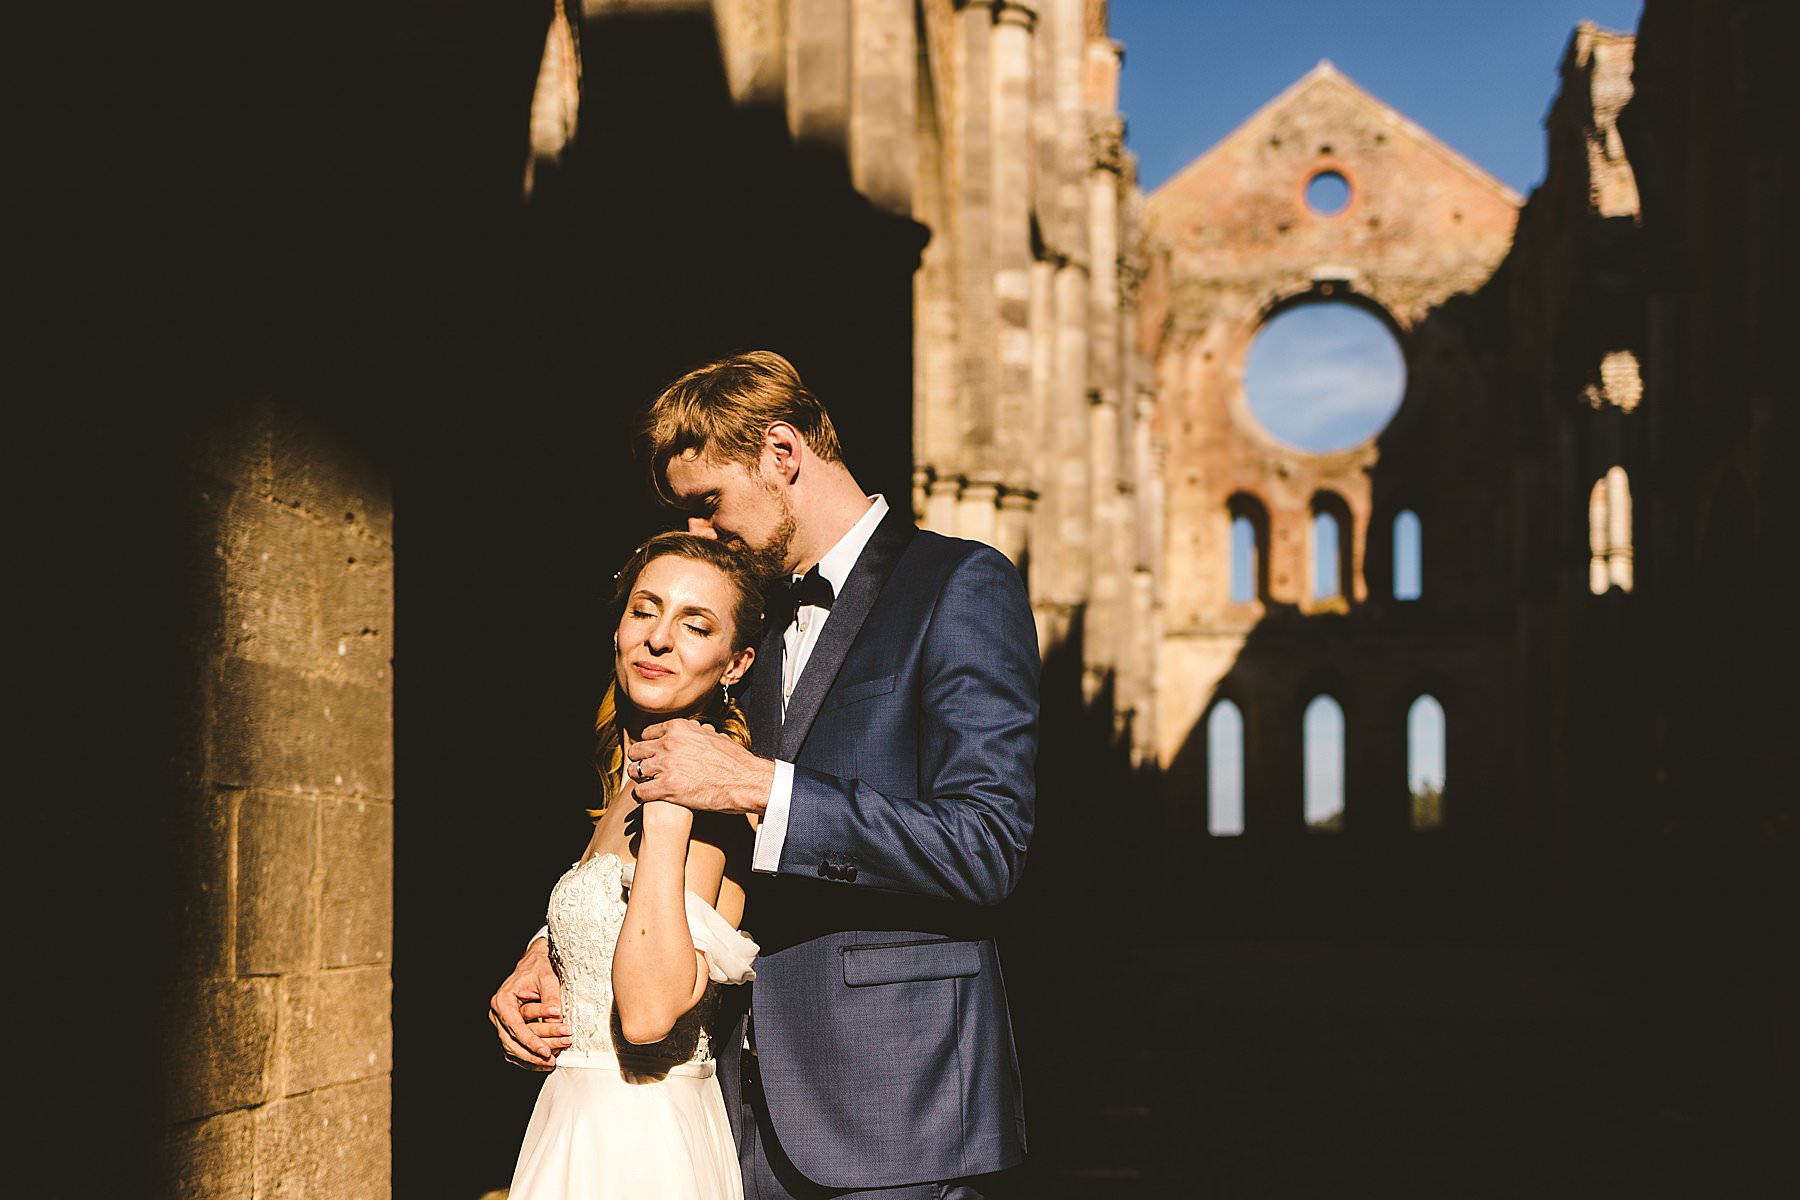 Lovely and romantic couple wedding photo inside the Roofless Abbey of San Galgano Church near Siena